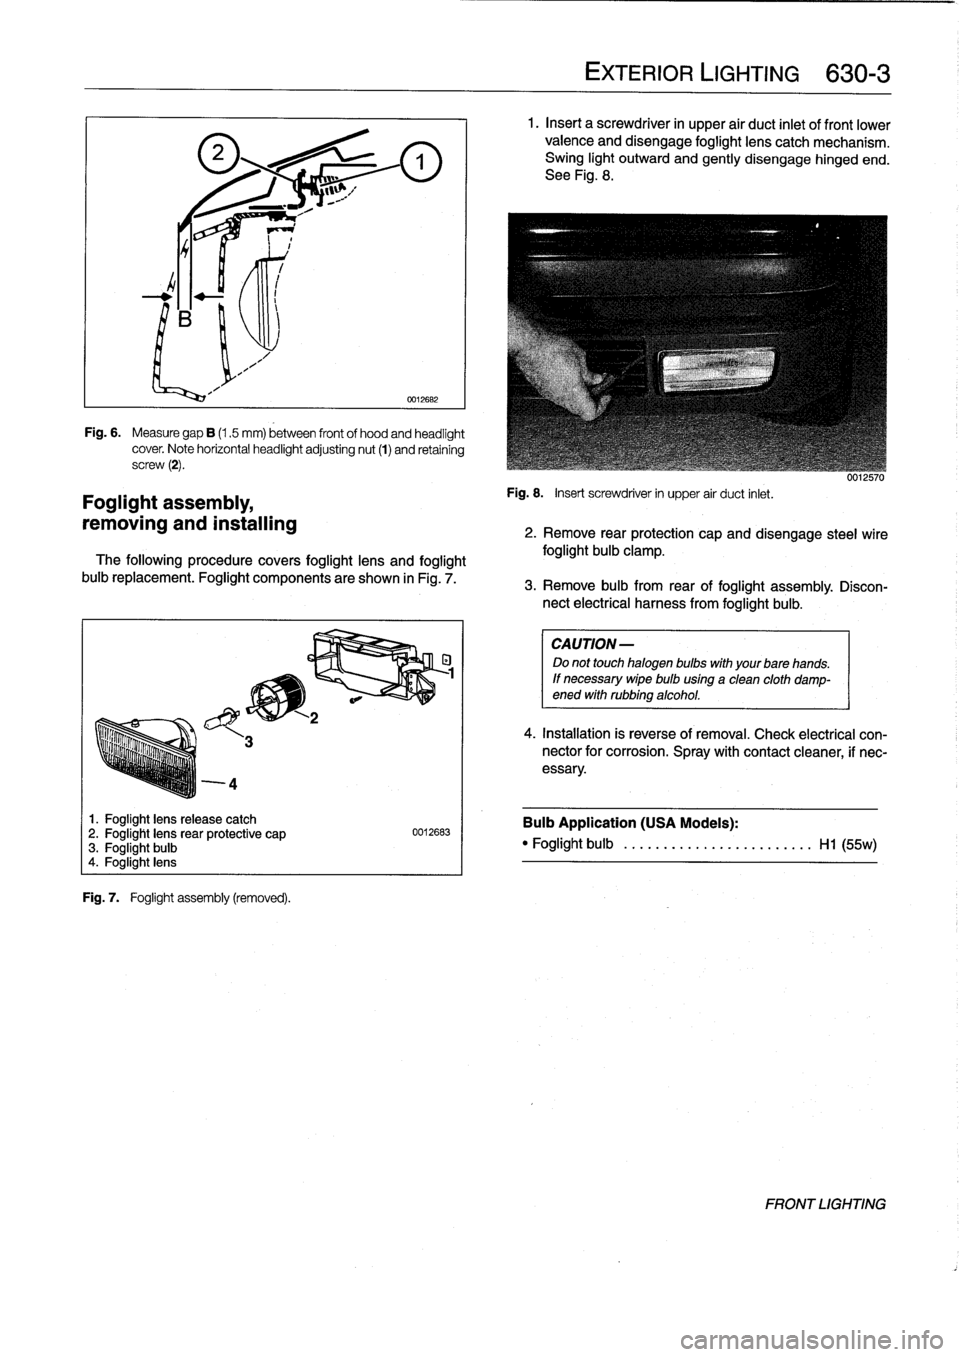 BMW 325i 1992 E36 Workshop Manual 4

Foglight
assembly,

removing
and
installing

1
.
Foglight
lens
release
catch
2
.
Foglight
lensrear
protective
cap
3
.
Foglight
bulb
4
.
Foglight
lens

Fig
.
7
.

	

Foglight
assembly
(removed)
.

0